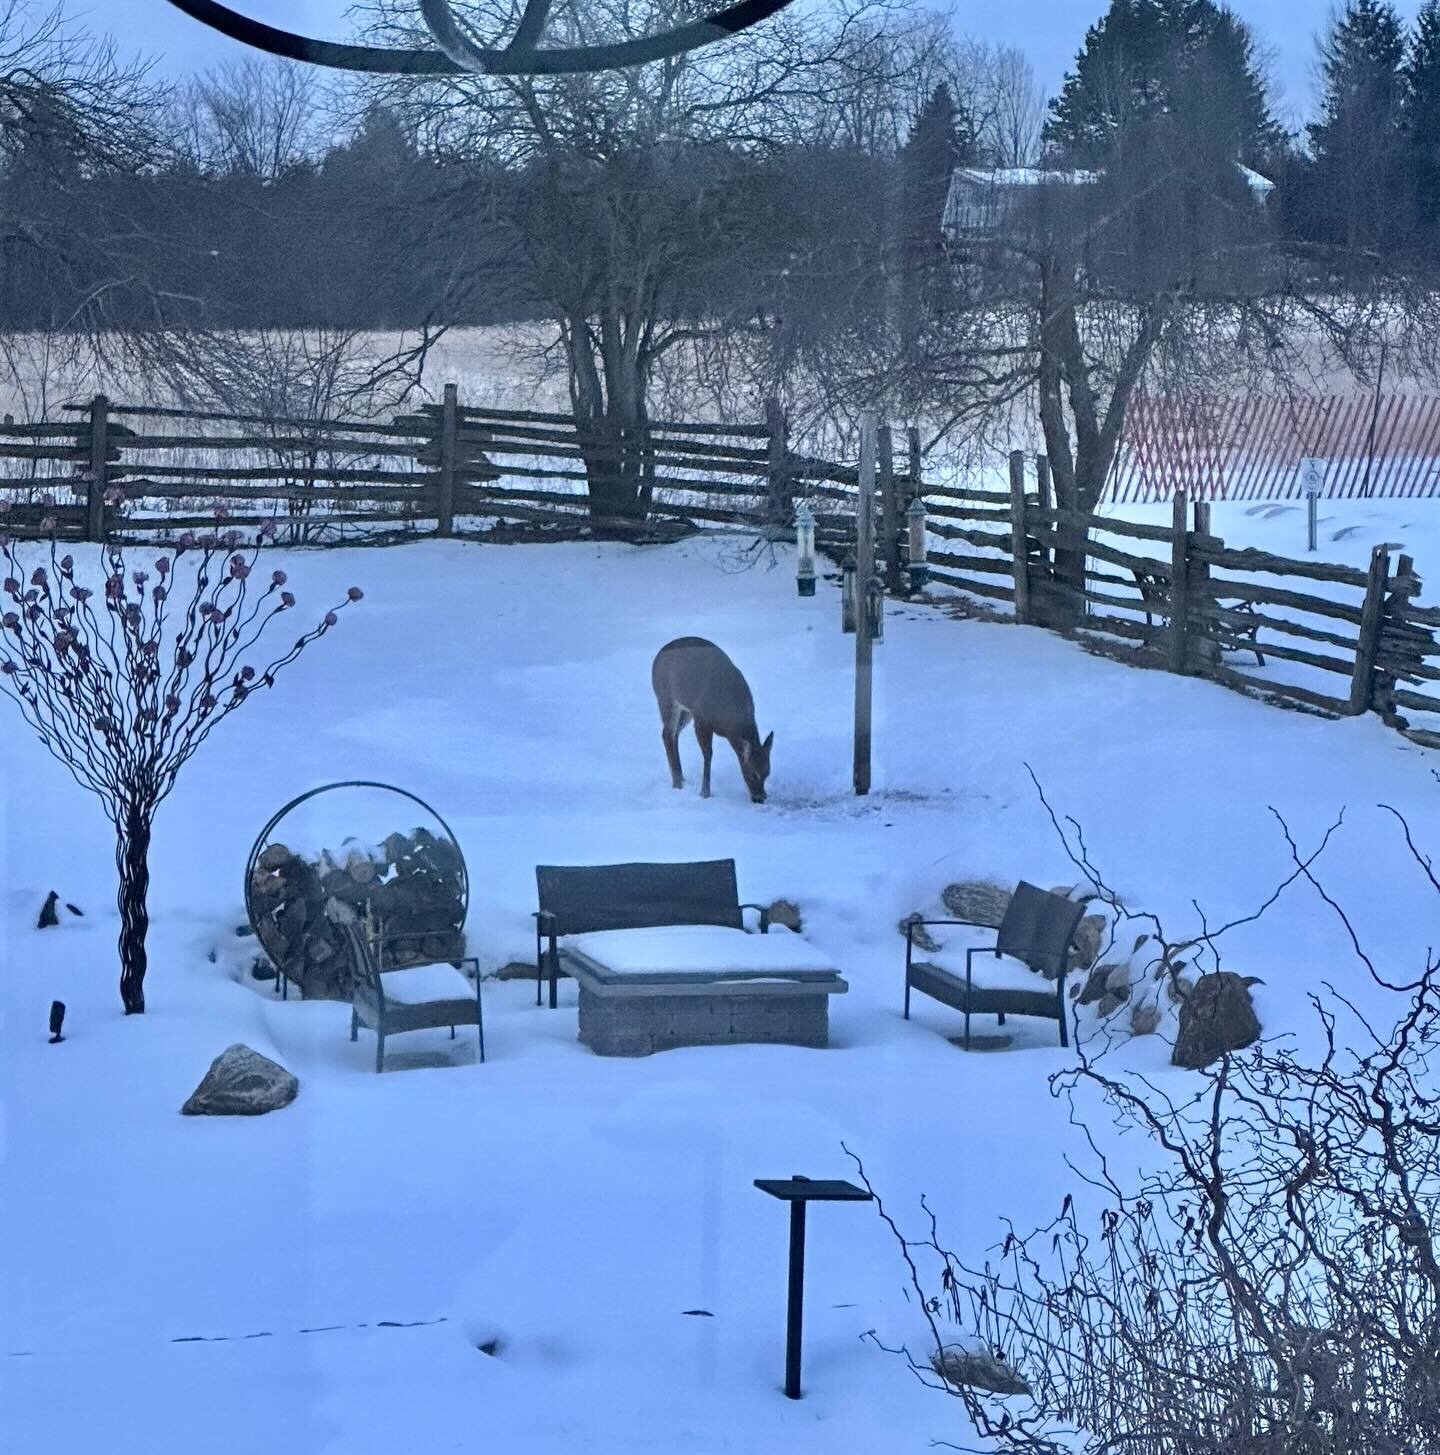 Good morning ! Woke up to a deer noshing on bird seed in our yard.